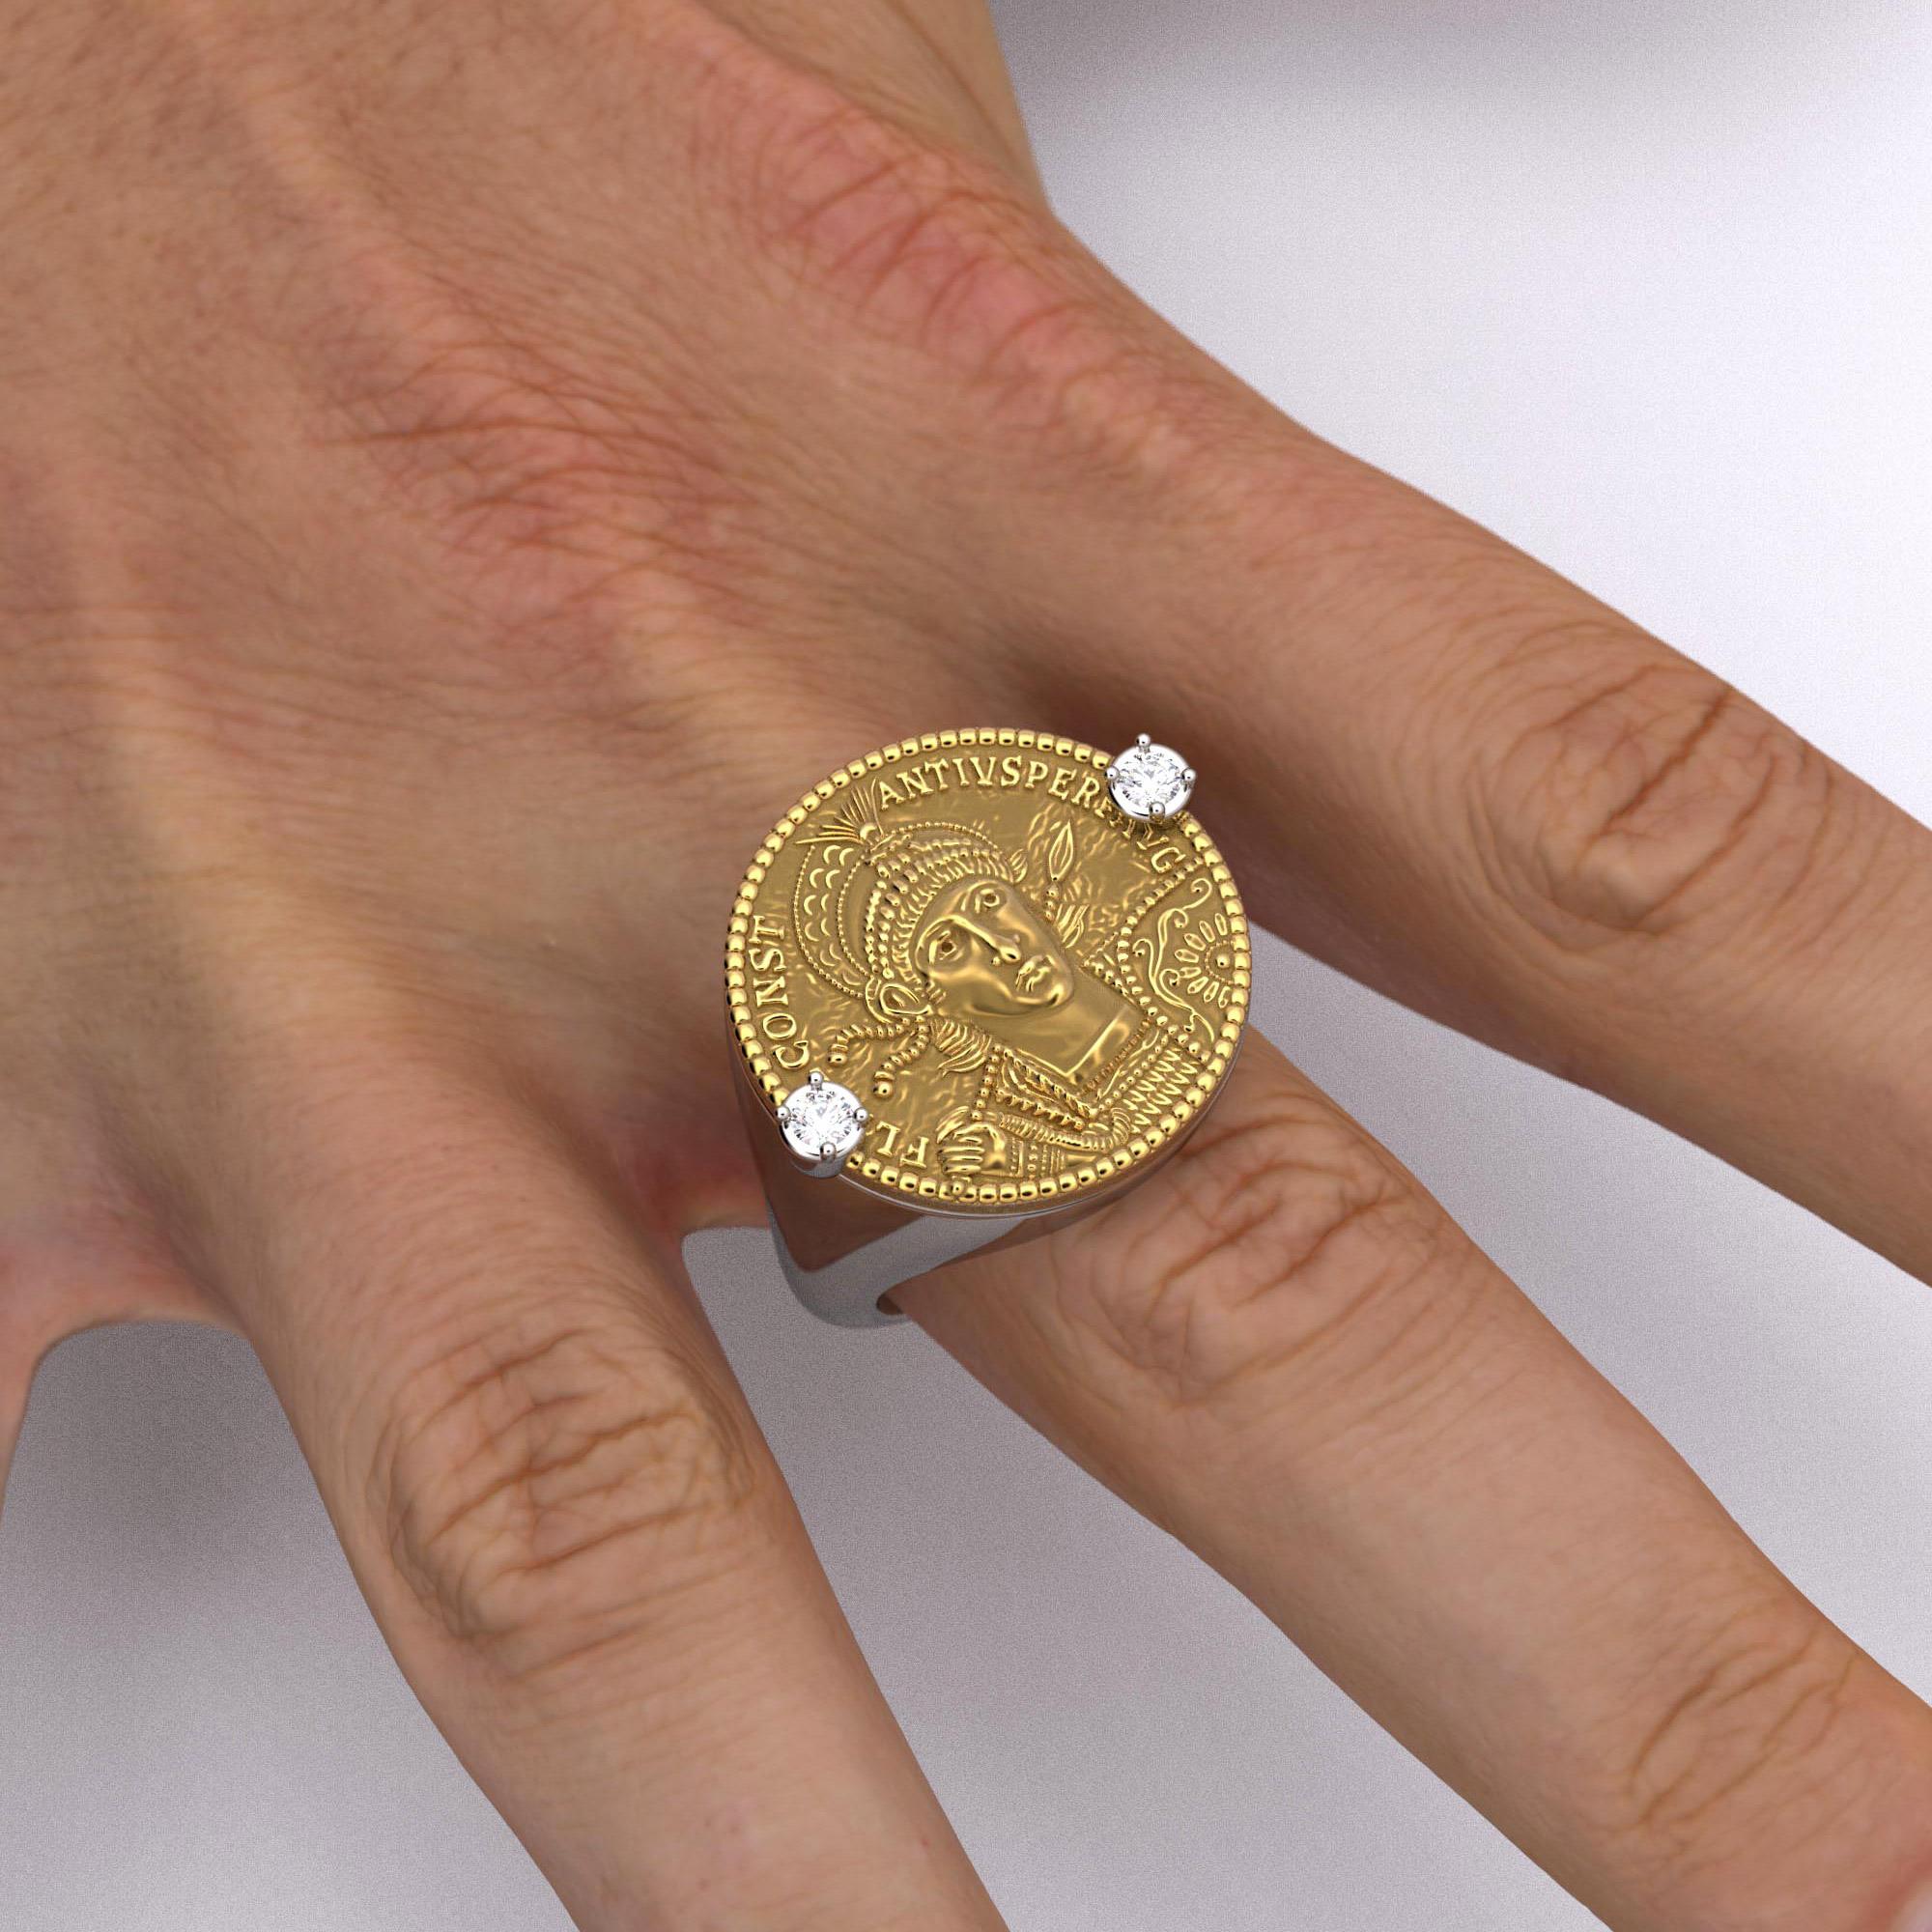 For Sale:  18k Ancient Roman Style Gold Coin Ring with a reproduction of a Roman Solidus 11